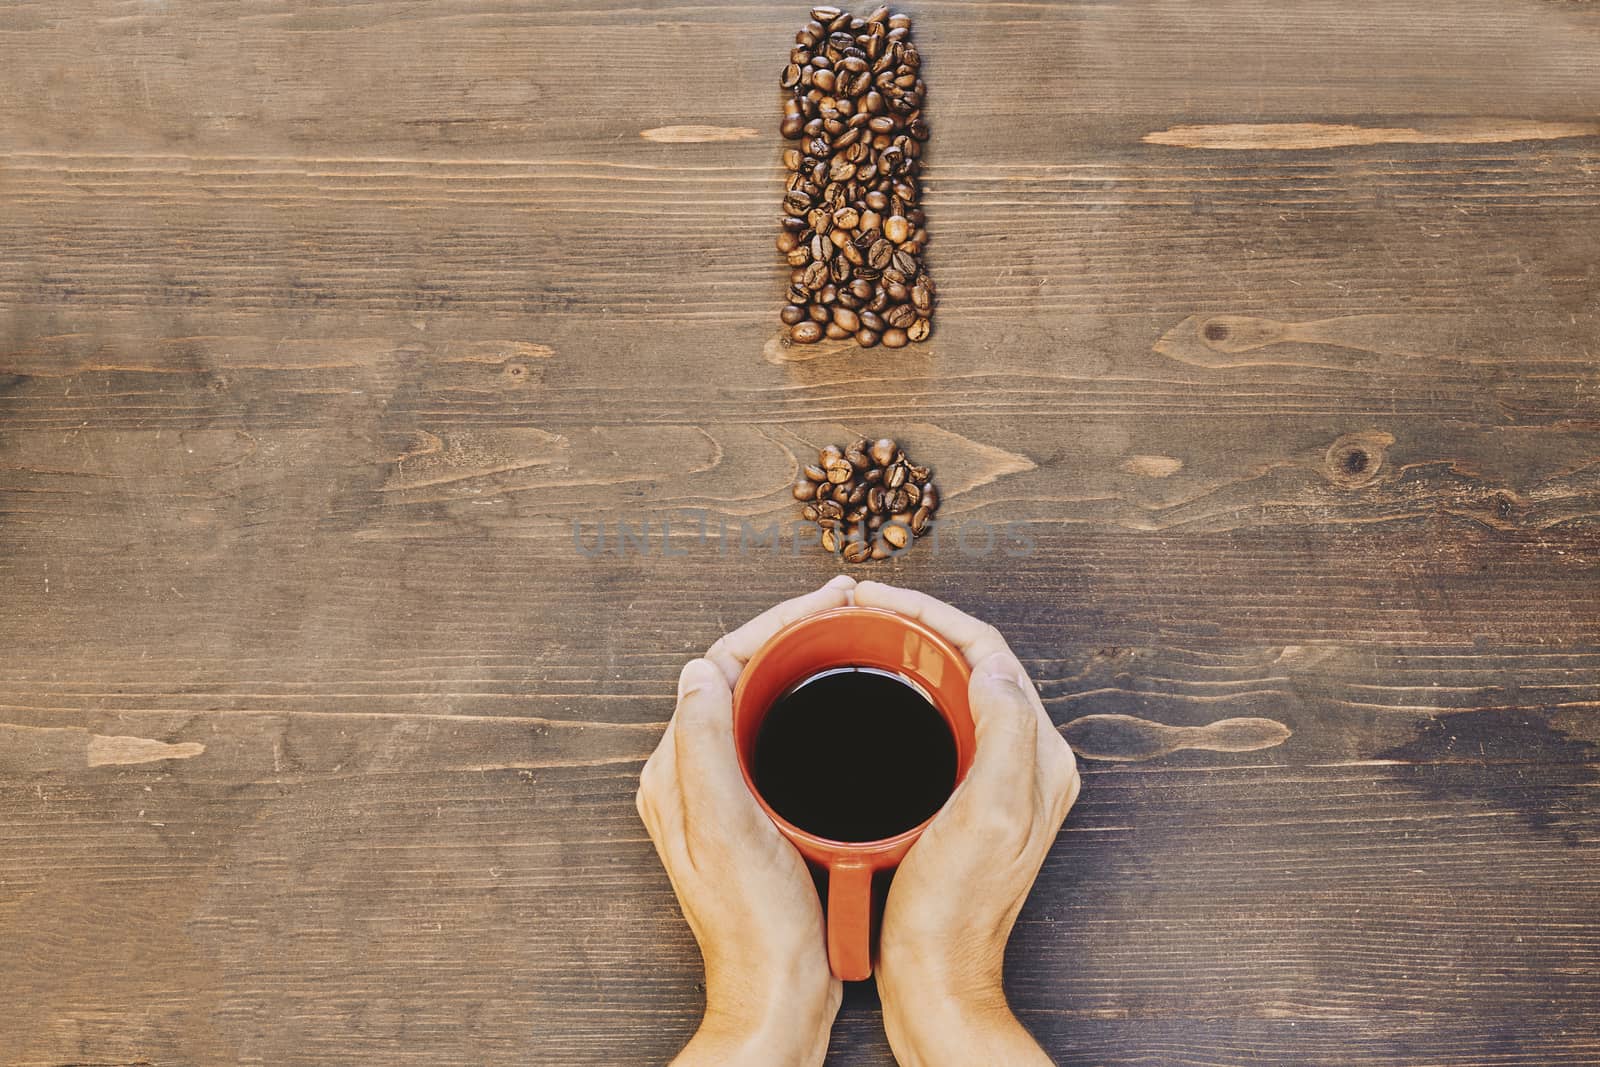 Hands holding a red coffee cup on a wooden table and with an exclamation mark made from coffee beans